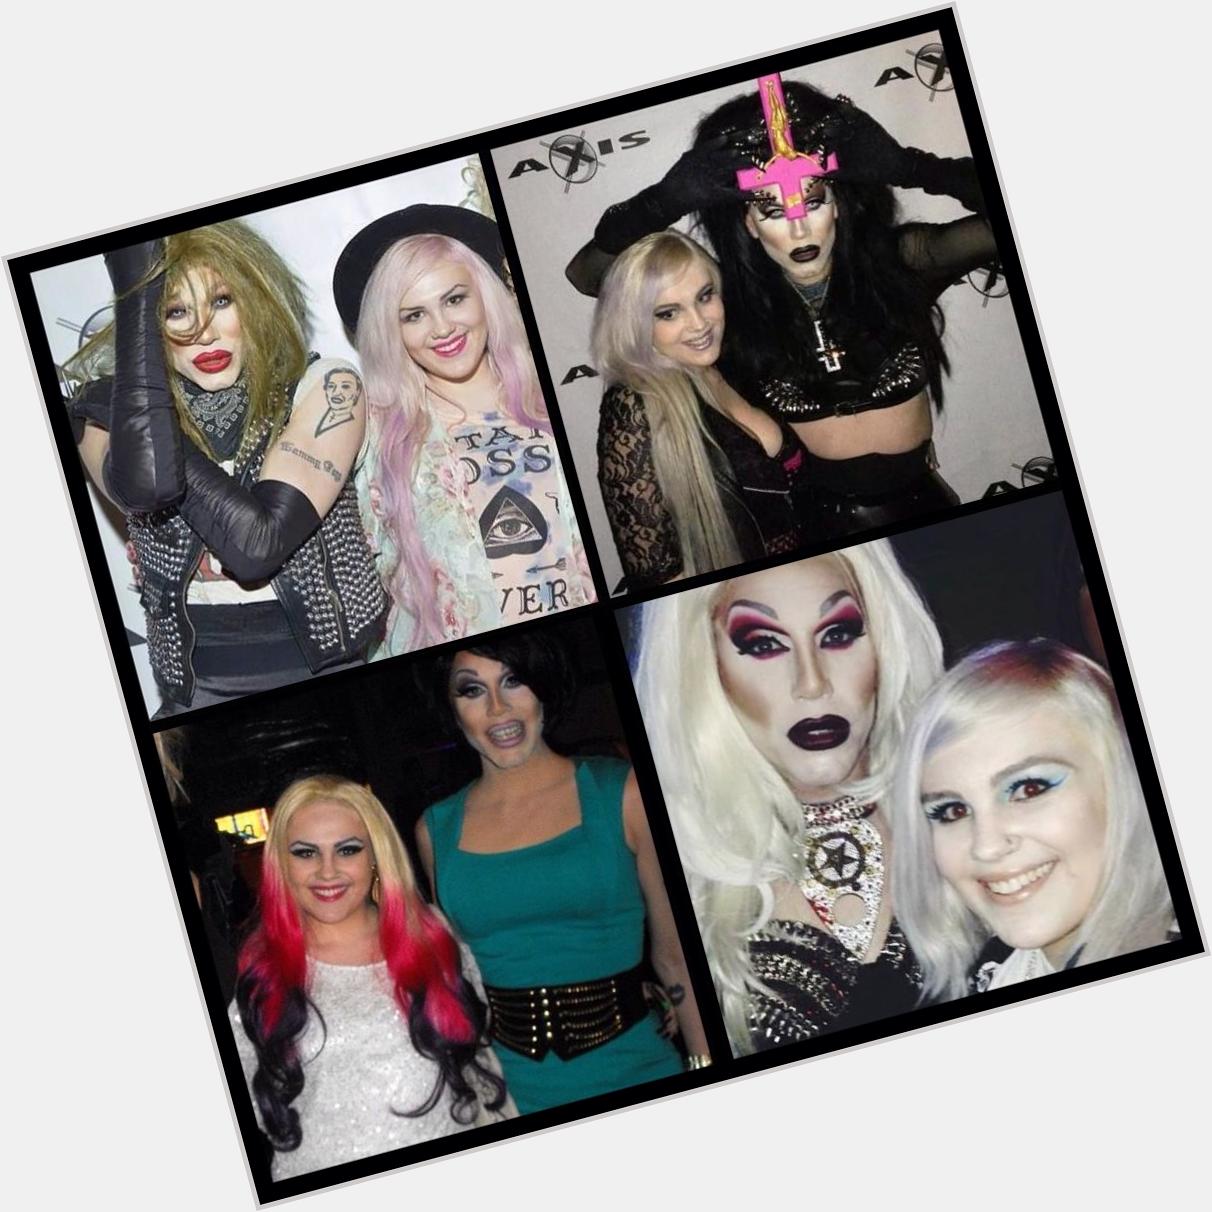 Happy birthday yer the best! Thank you for keeping drag alive & exciting   